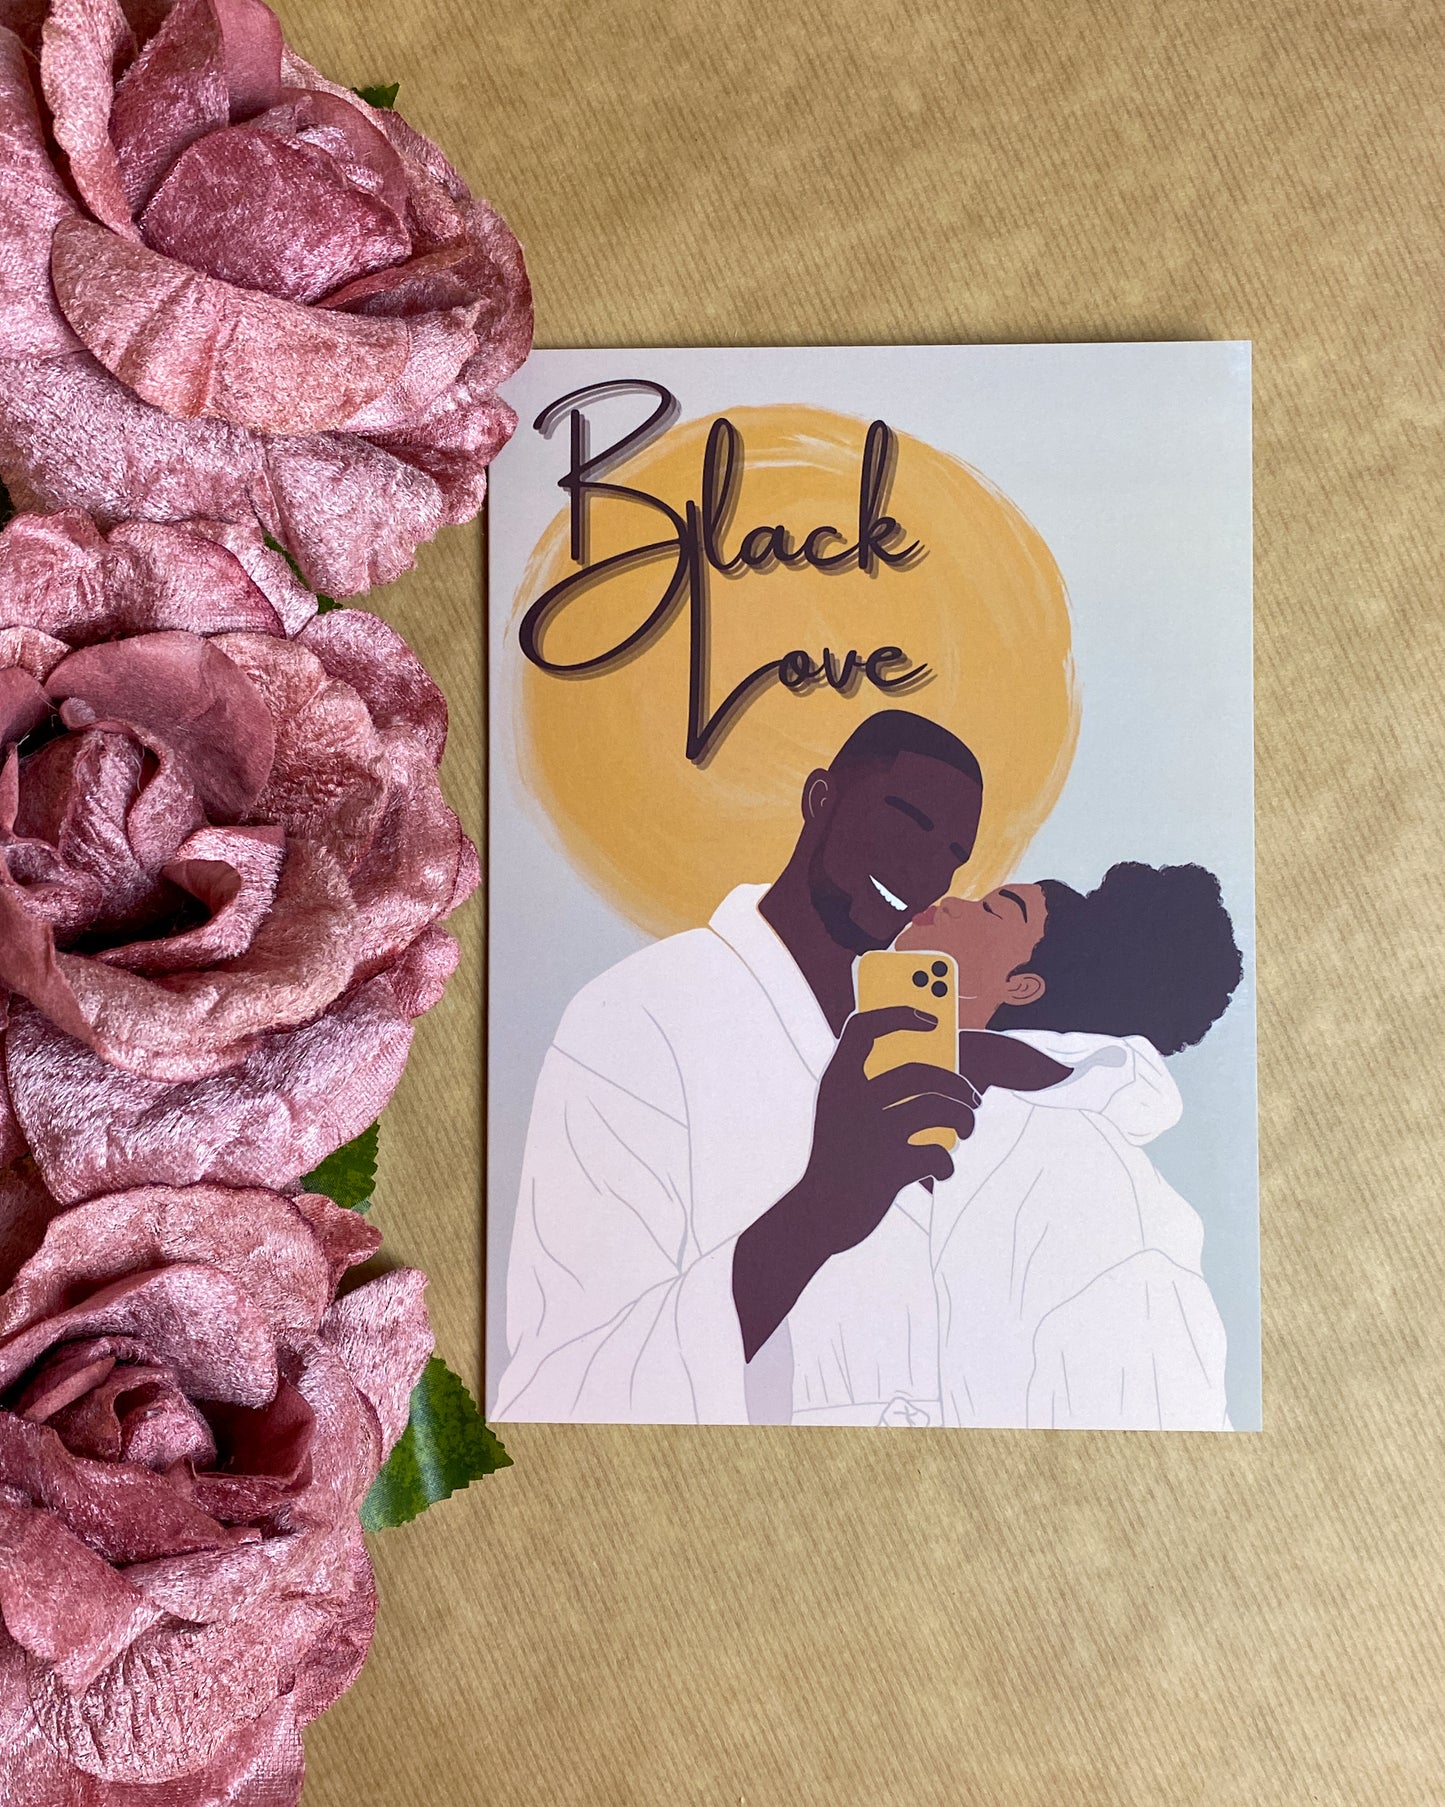 Selfie Lover’s Black Love Couple Greetings Card Mixed Race